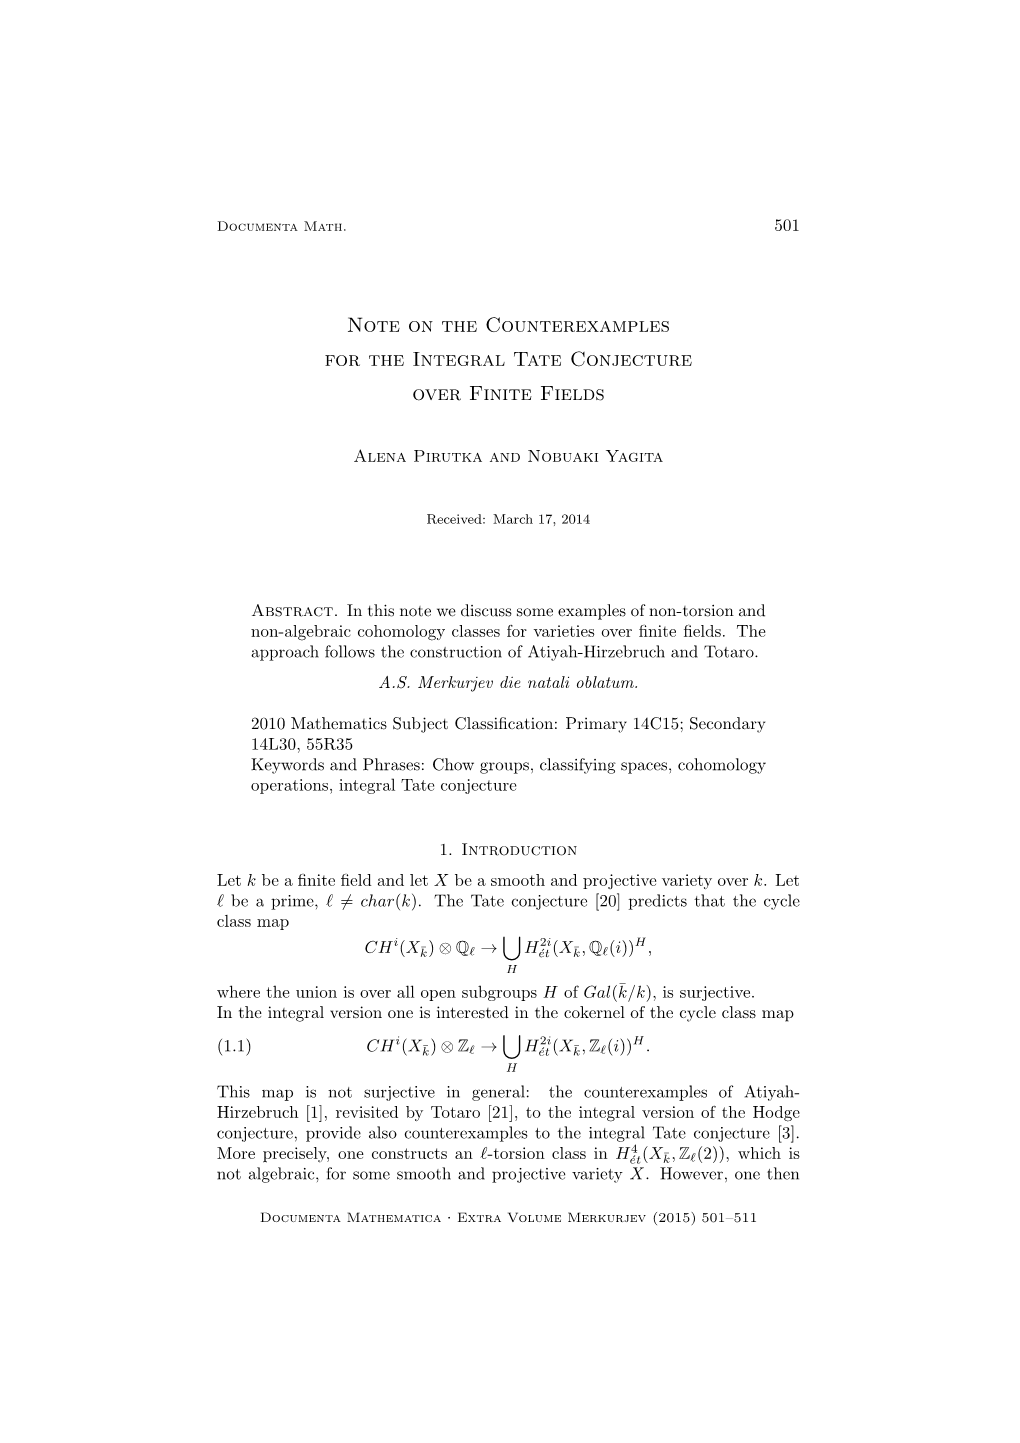 Note on the Counterexamples for the Integral Tate Conjecture Over Finite Fields